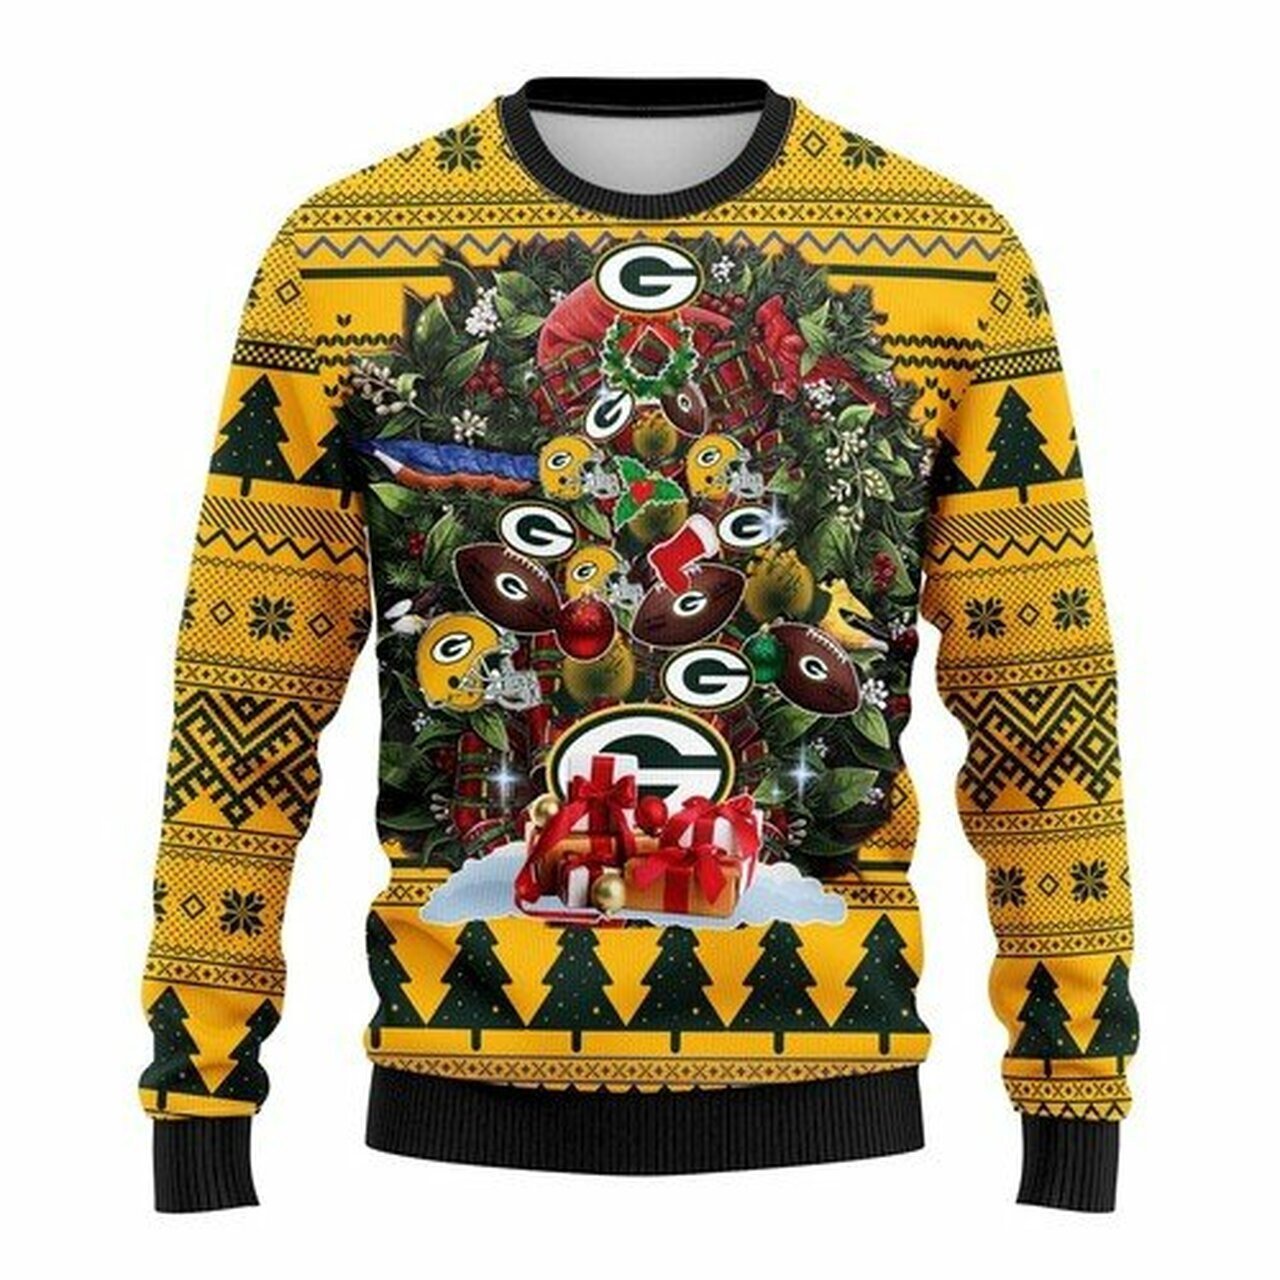 NFL Green Bay Packers christmas tree ugly sweater